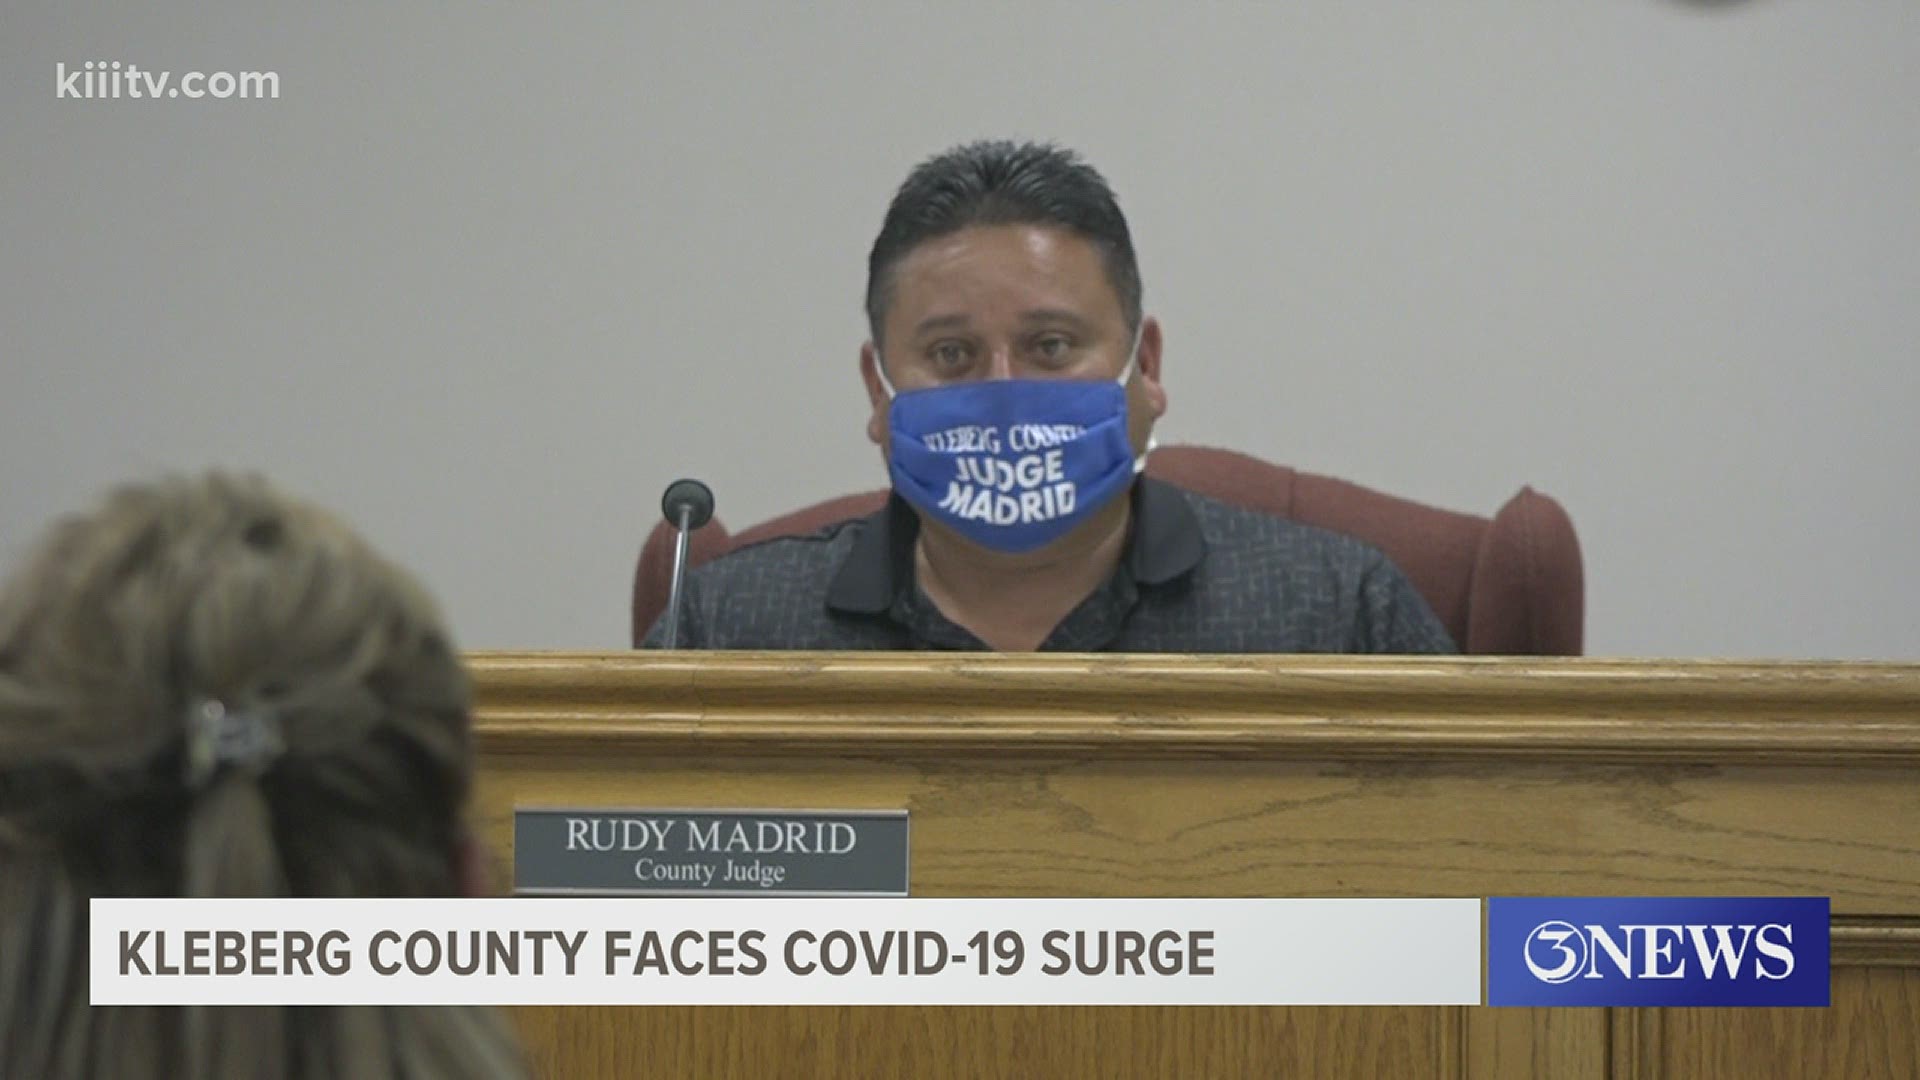 56 new COVID-19 cases were reported Sunday from a 5-day period, state health services told Kleberg County Judge Rudy Madrid and Kingsville Mayor Sam Fugate.